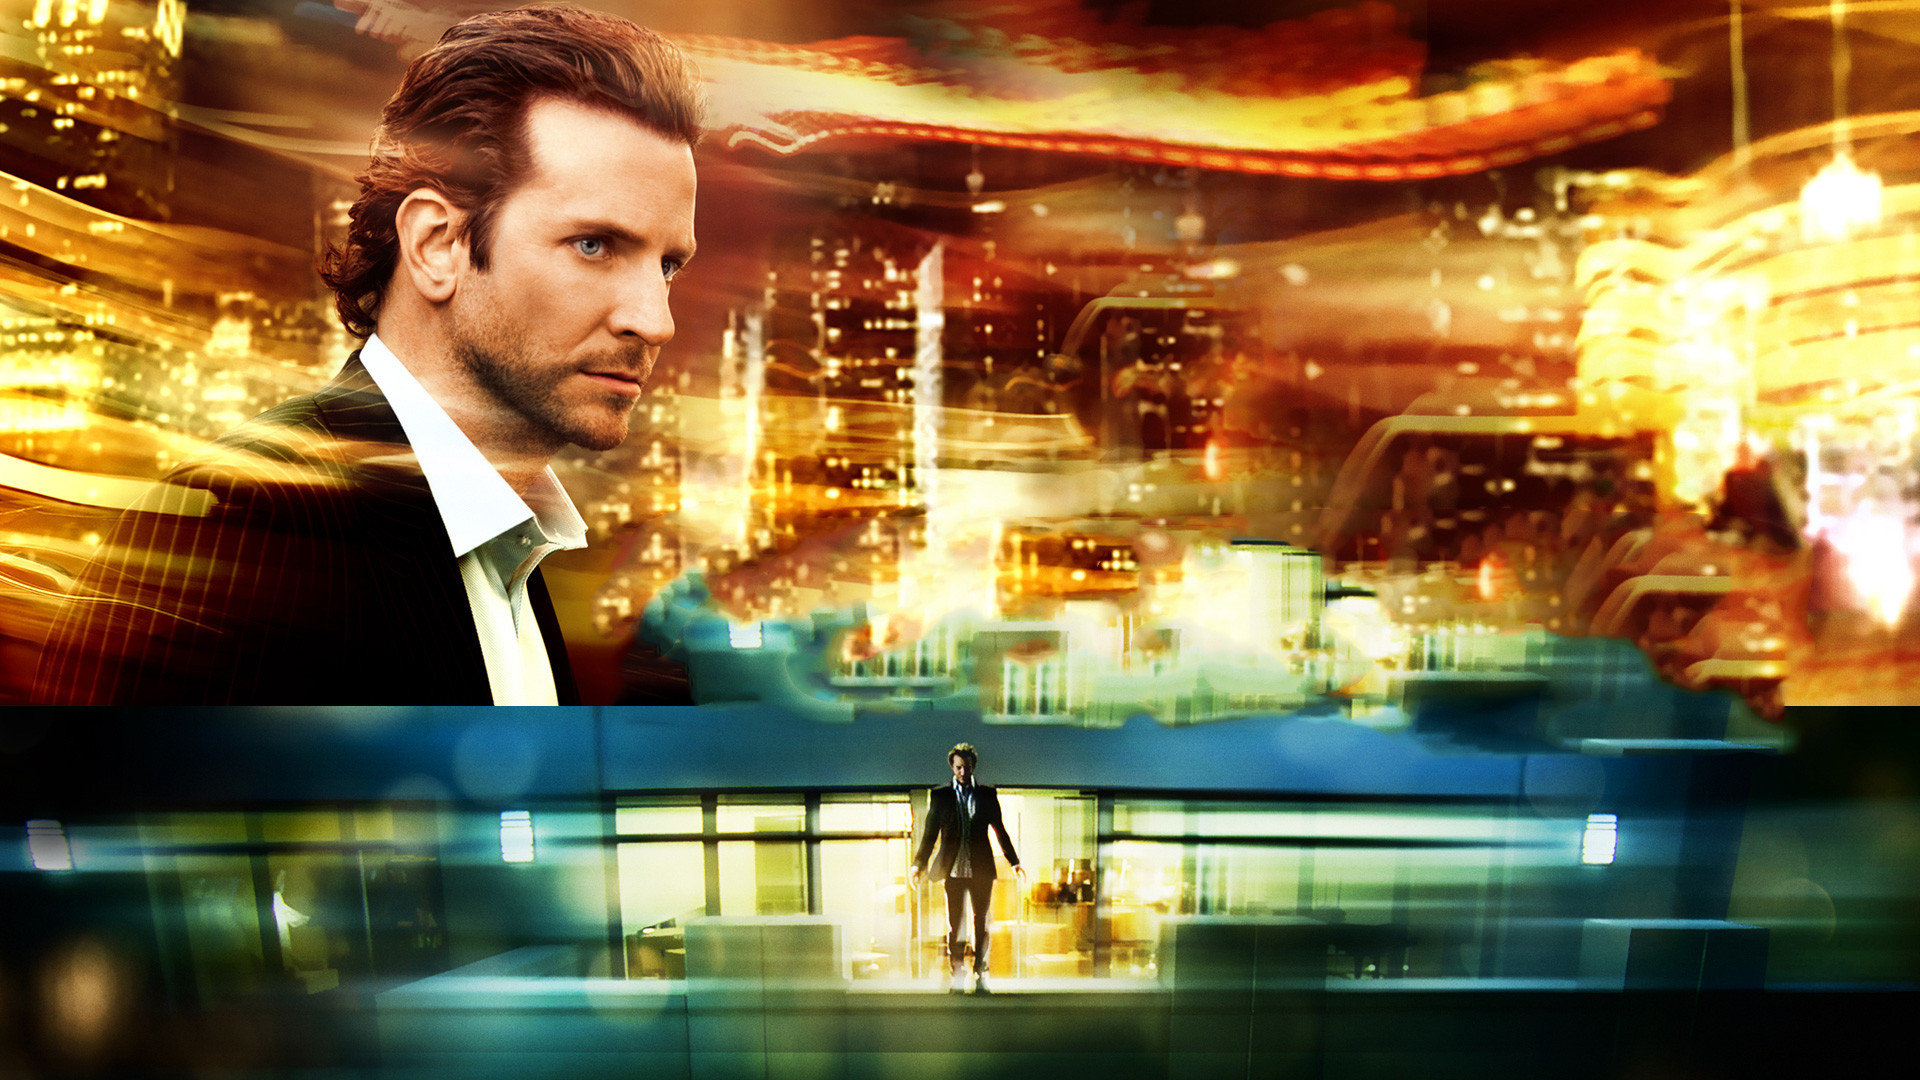 Download hd 1080p Bradley Cooper PC background ID:294841 for free